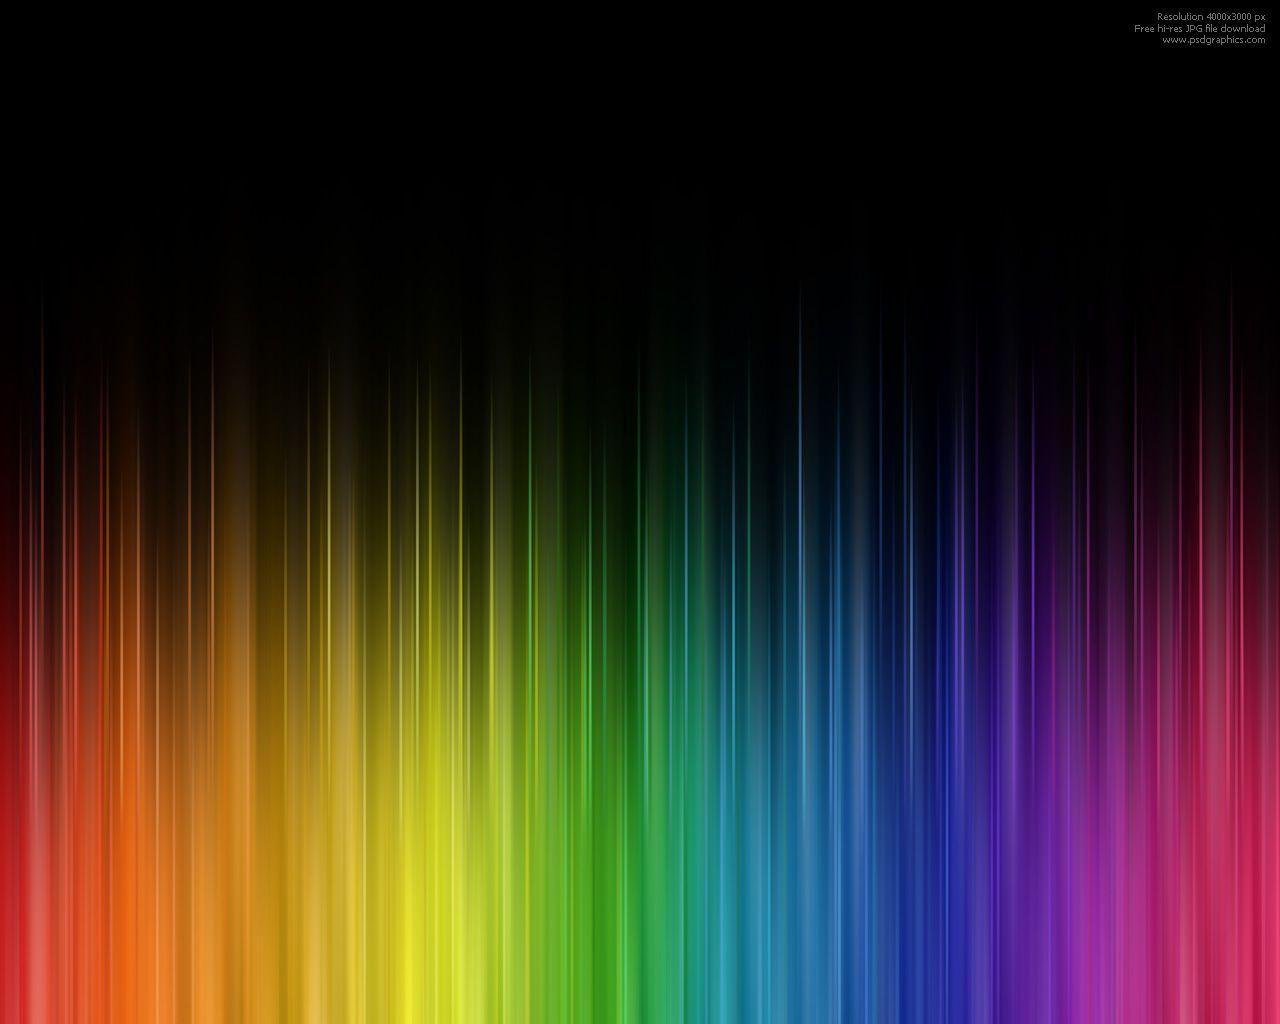 Colorful Abstract Bars Background Wallpaper. Colorful Background